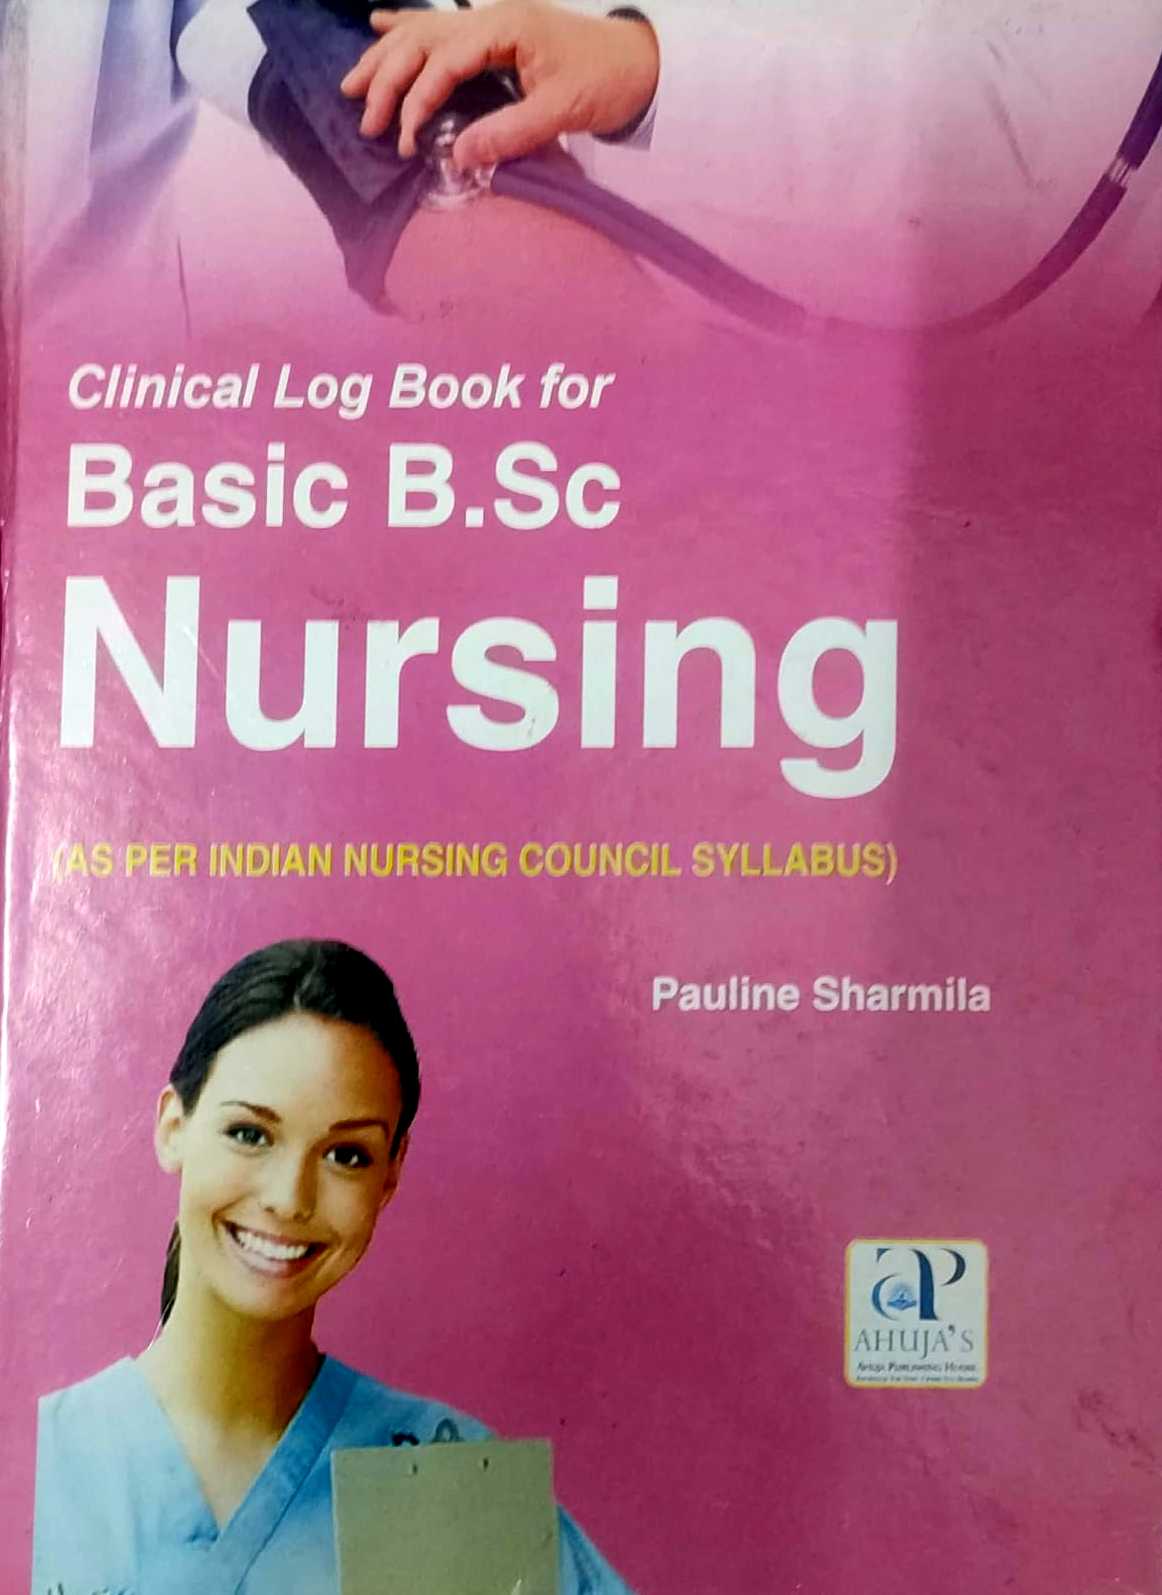 exclusive-publishers/ahuja-publishing-house/clinical-log-book-for-basic-b-sc-nursing-9789380316673